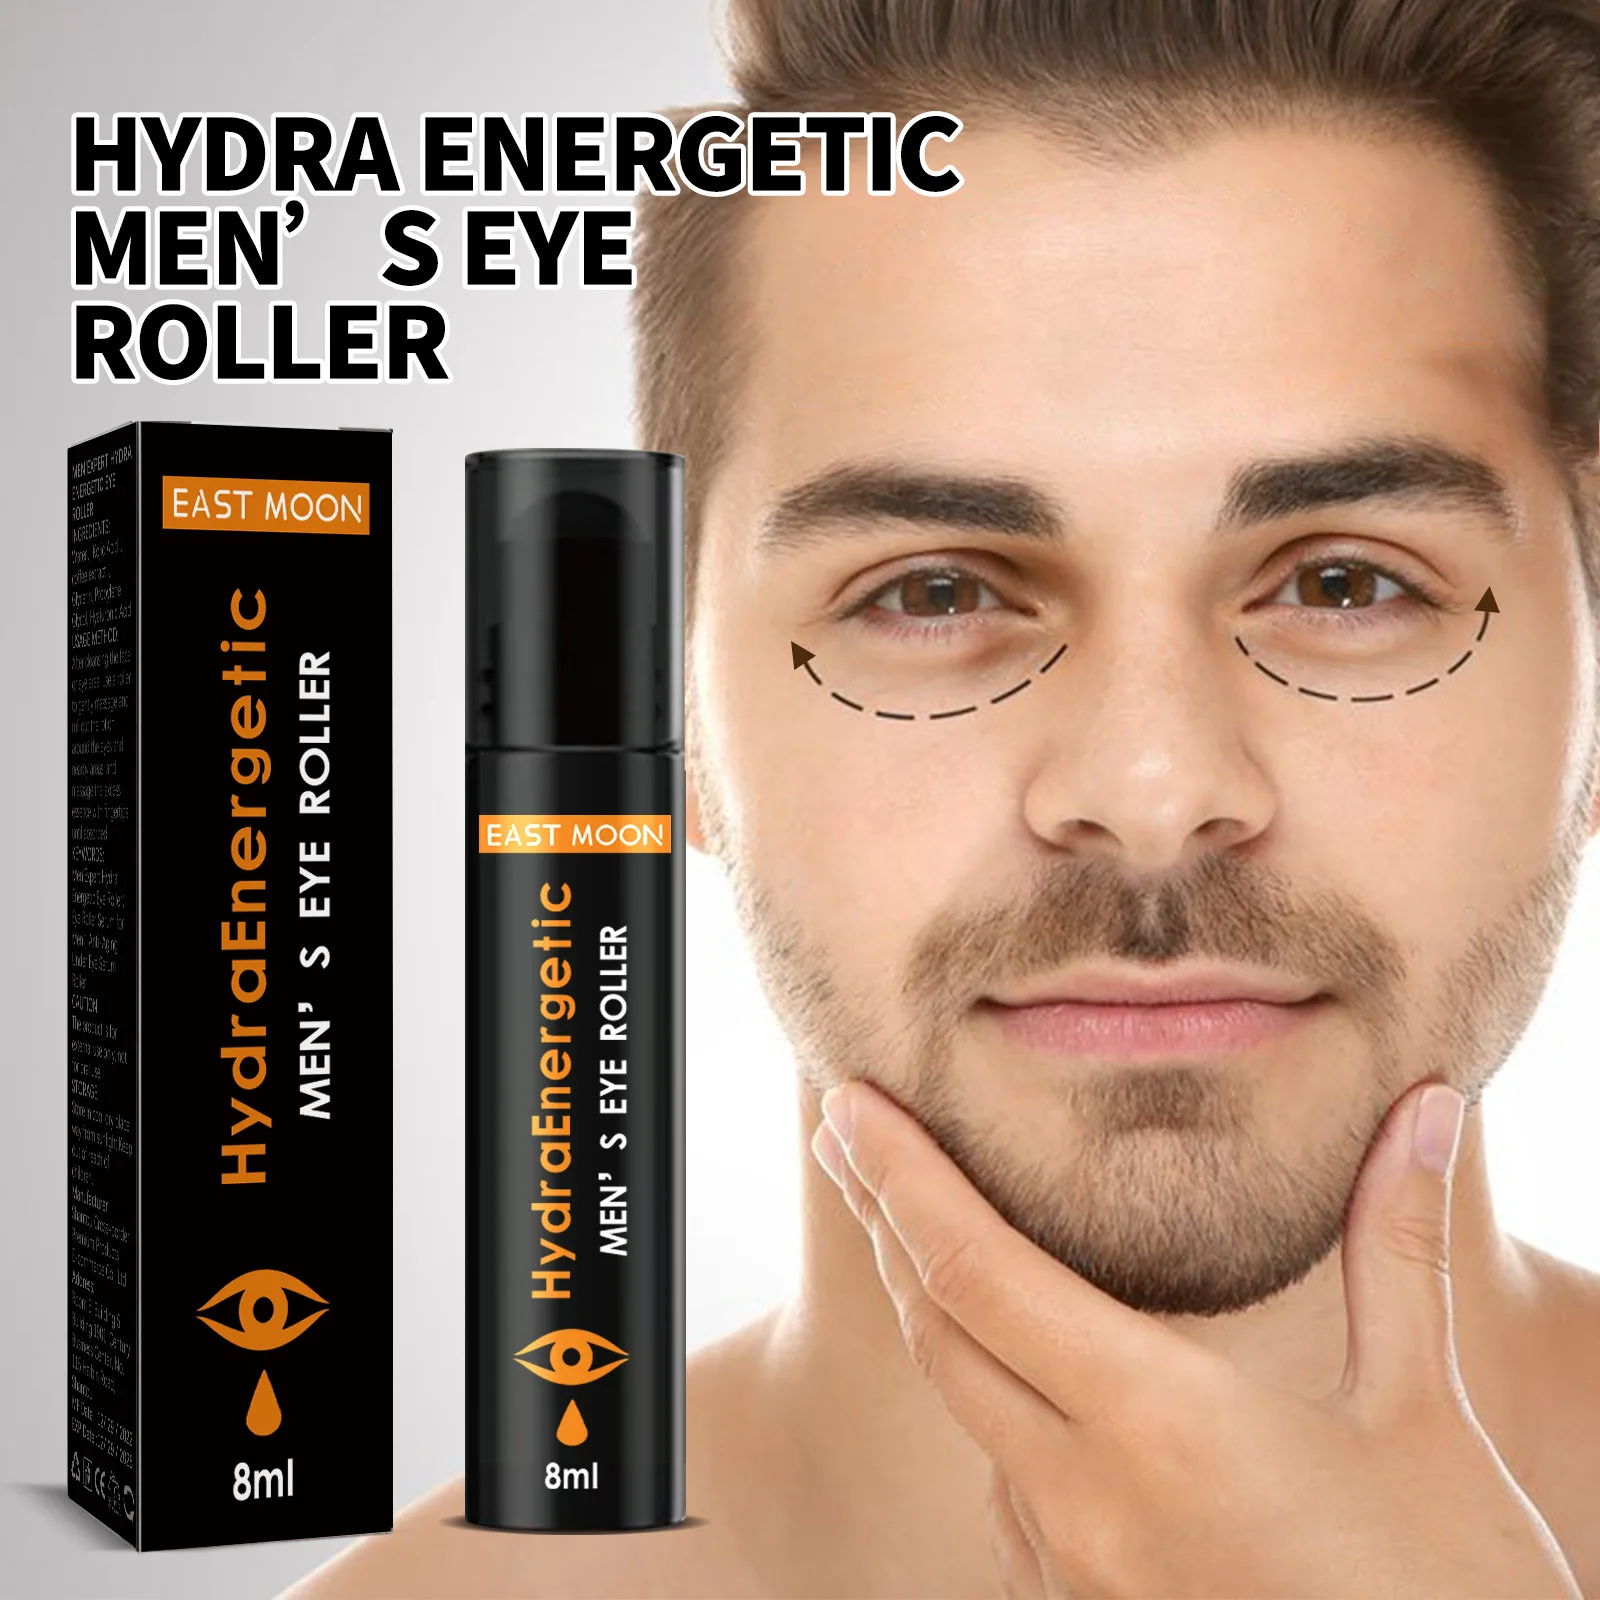 Men's eye rollers tighten lighten fine lines puffiness black circles and moisturize eye bags